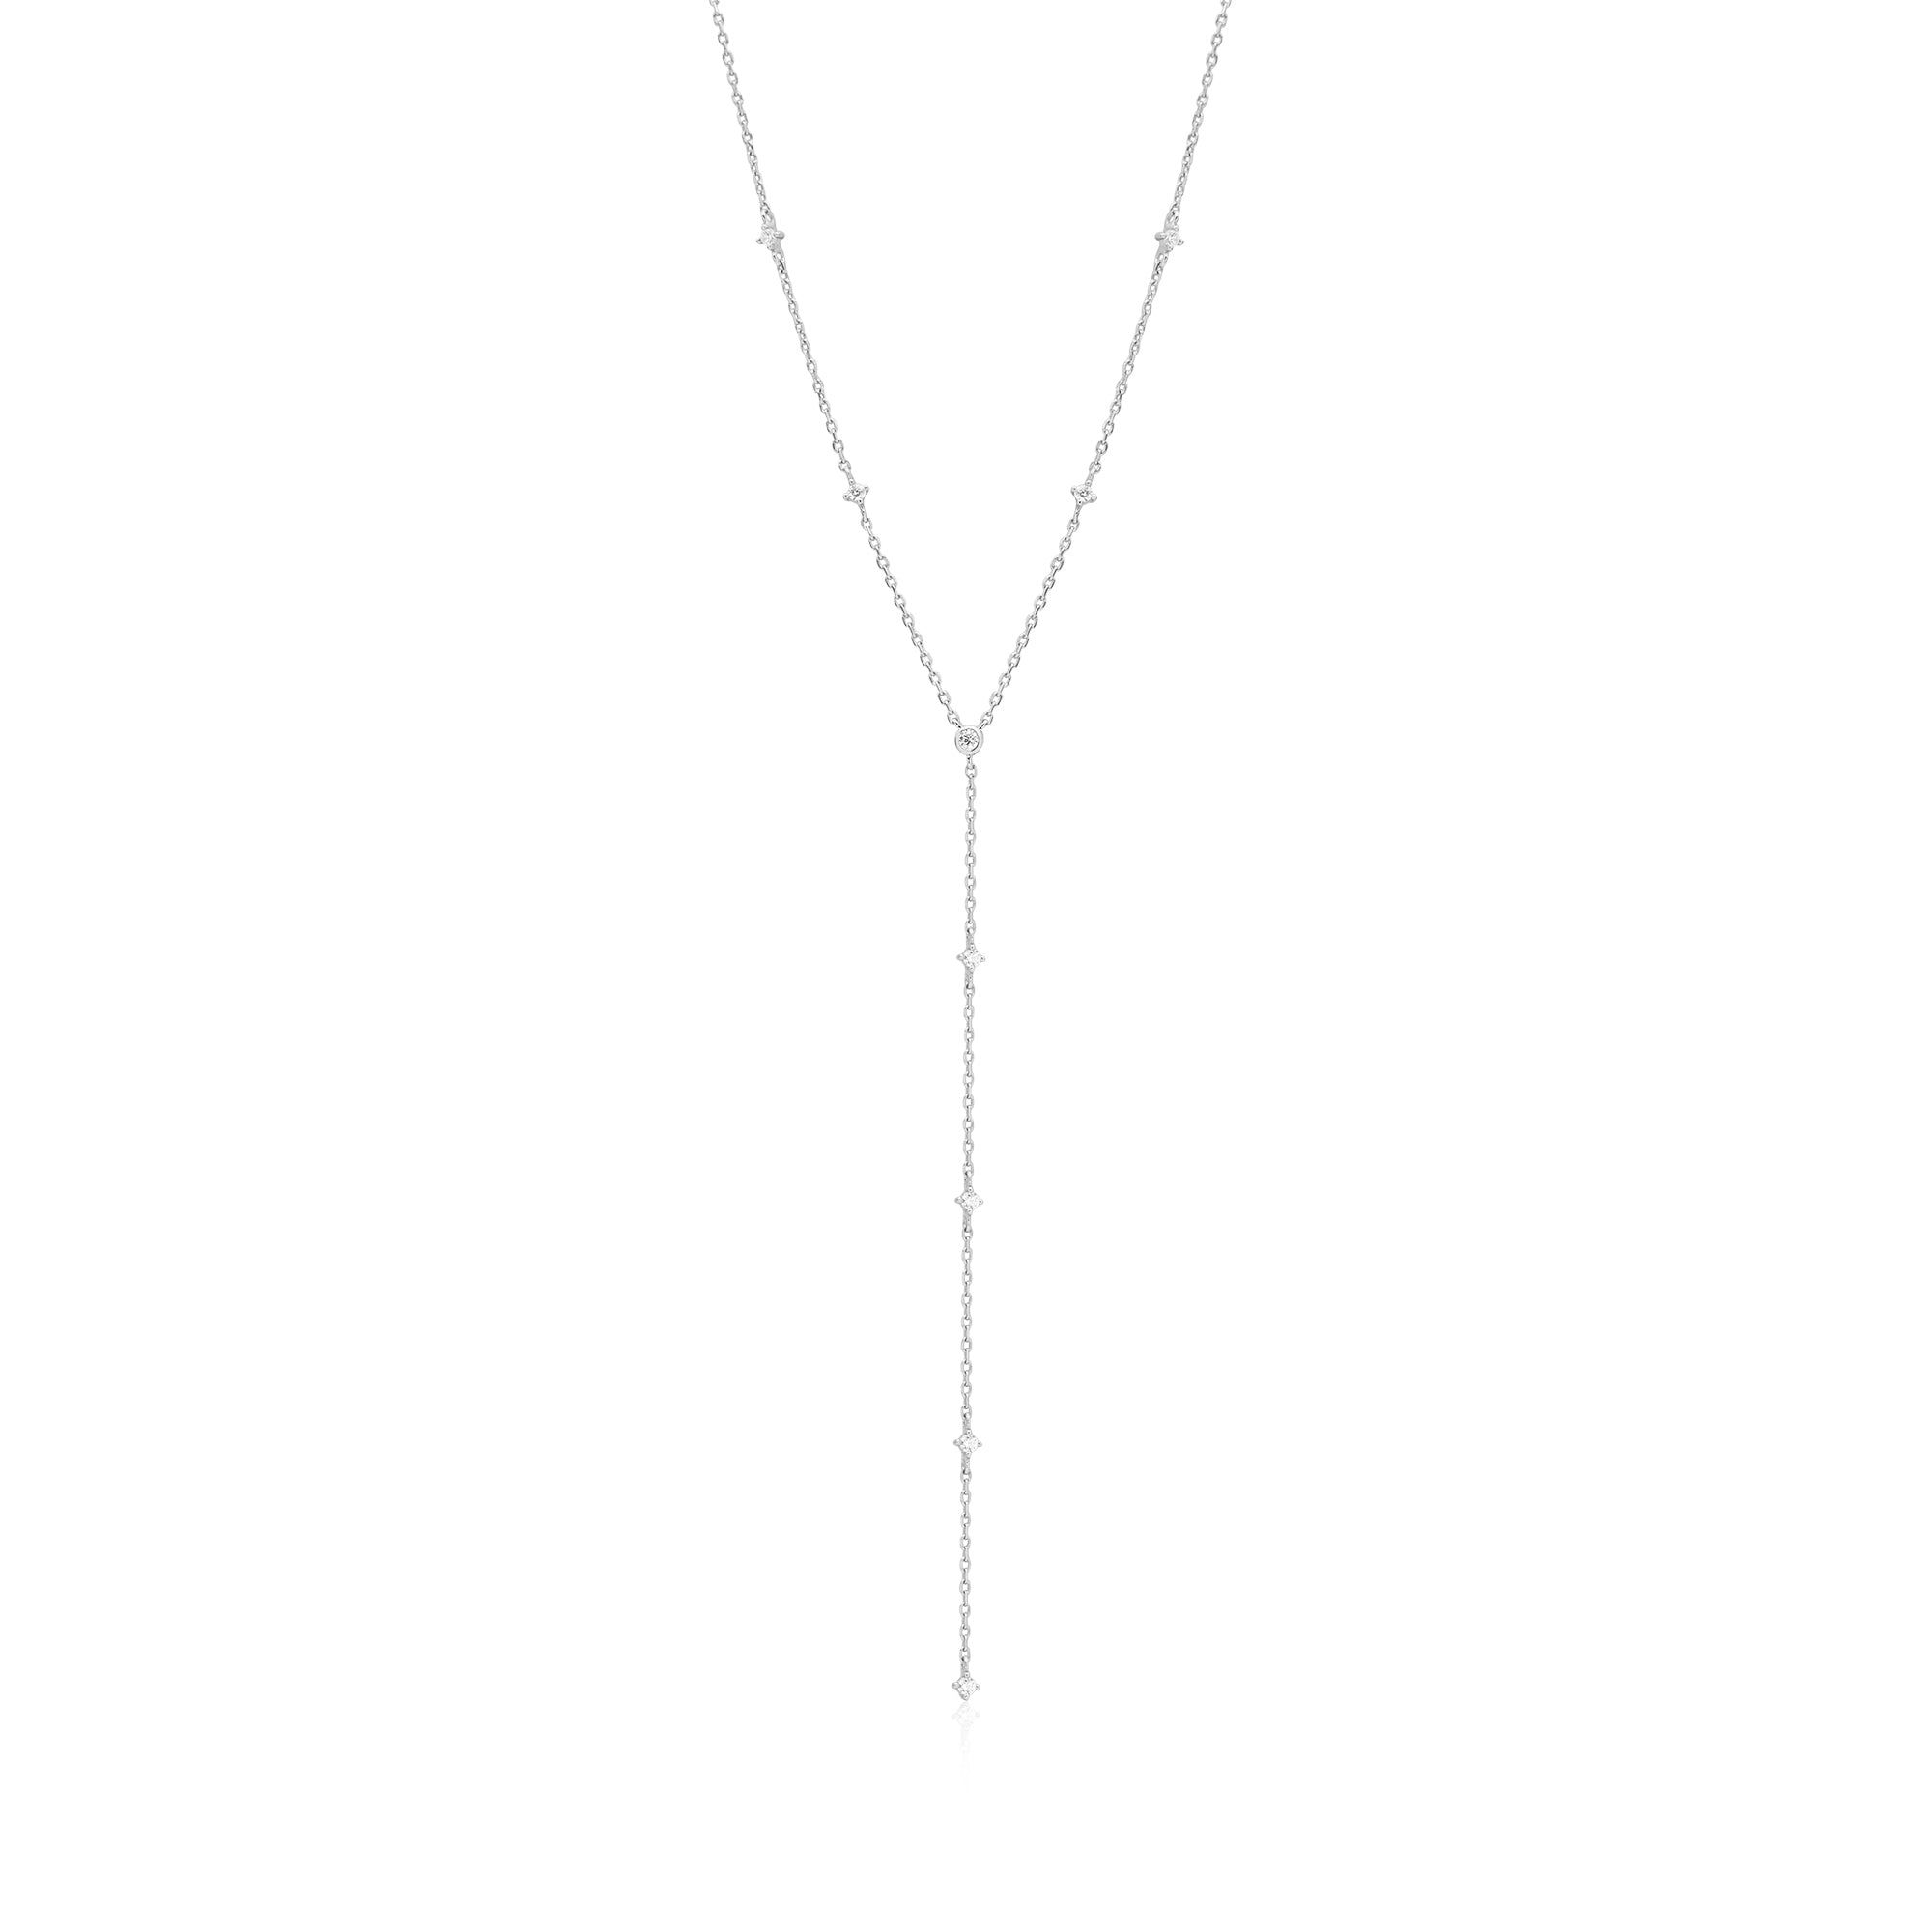 a long silver necklace with a long chain